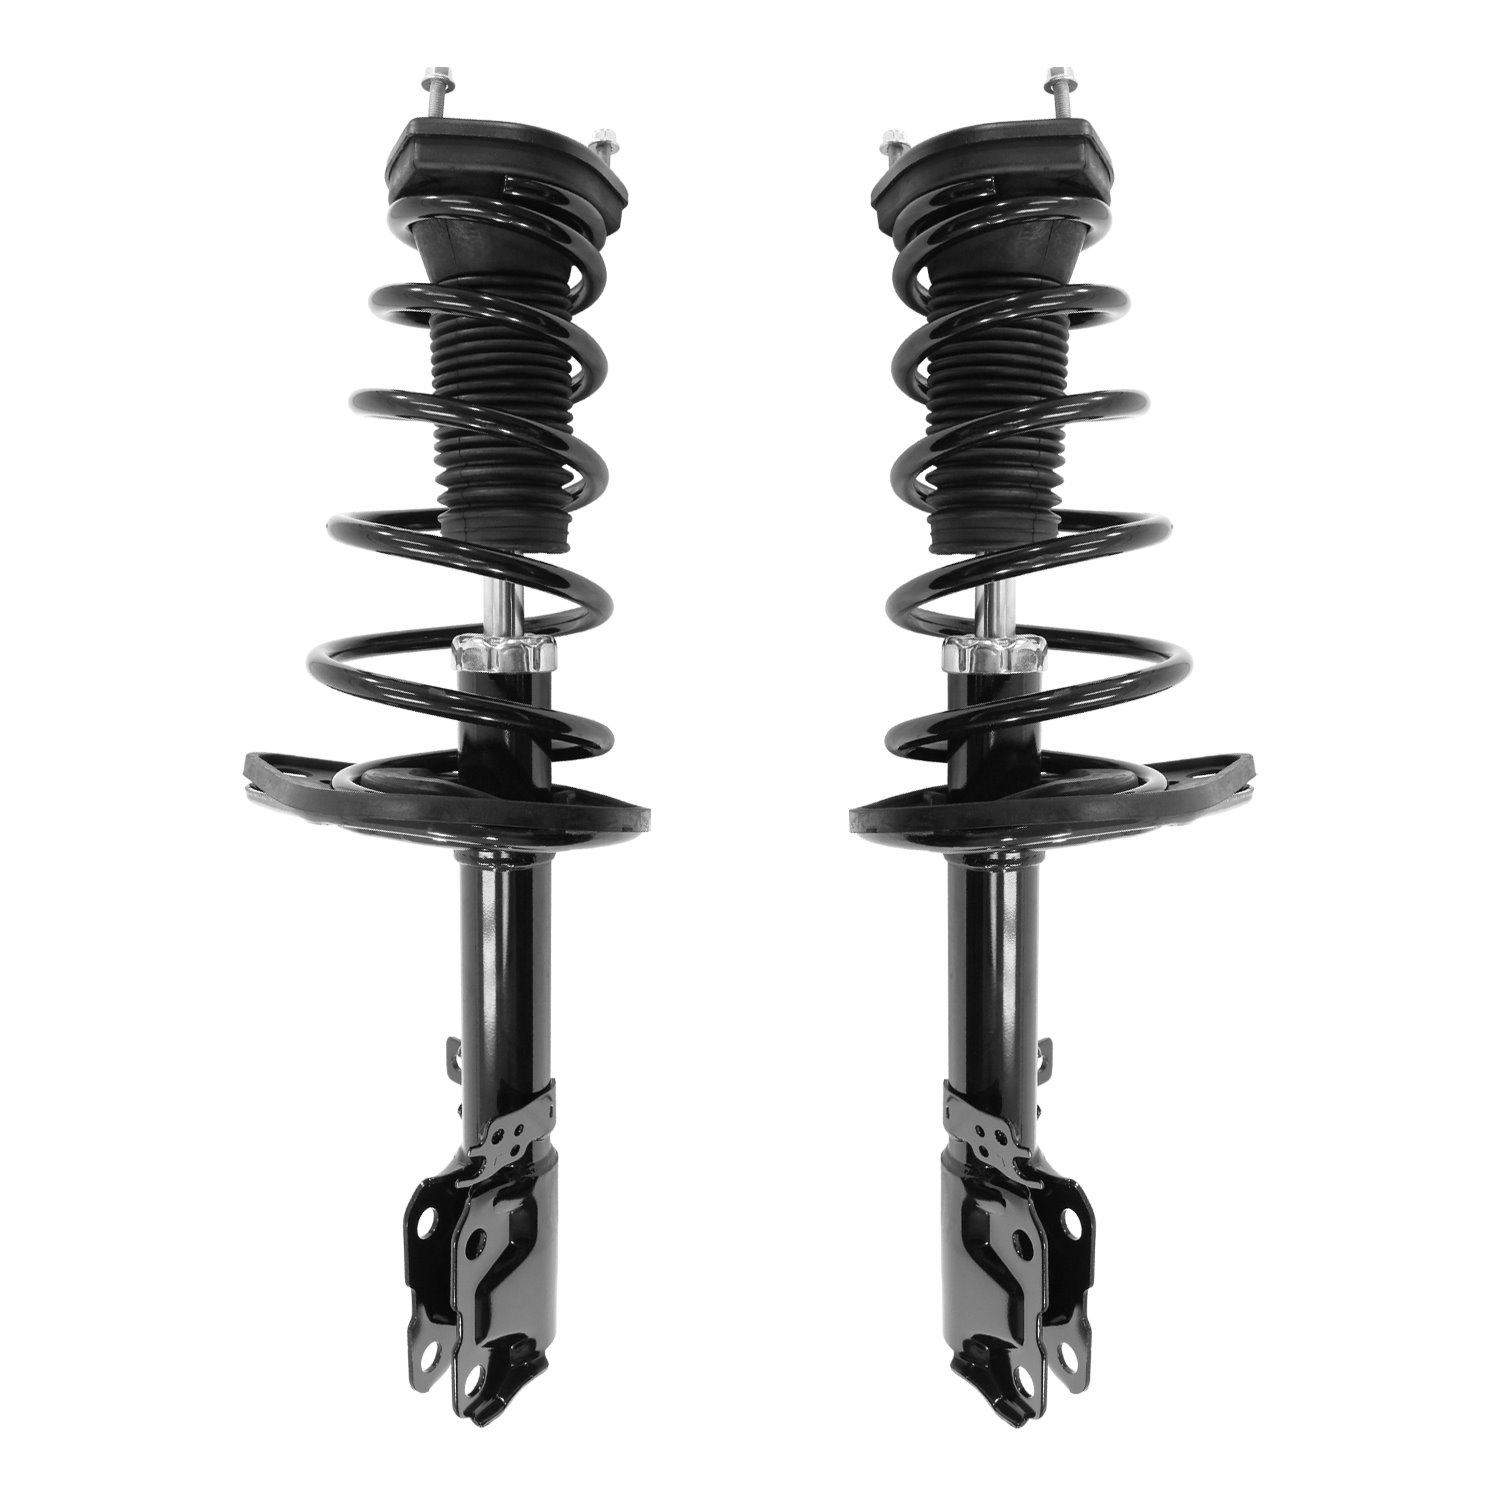 2-16083-16084-001 Rear Suspension Strut & Coil Spring Assemby Set Fits Select Toyota Avalon